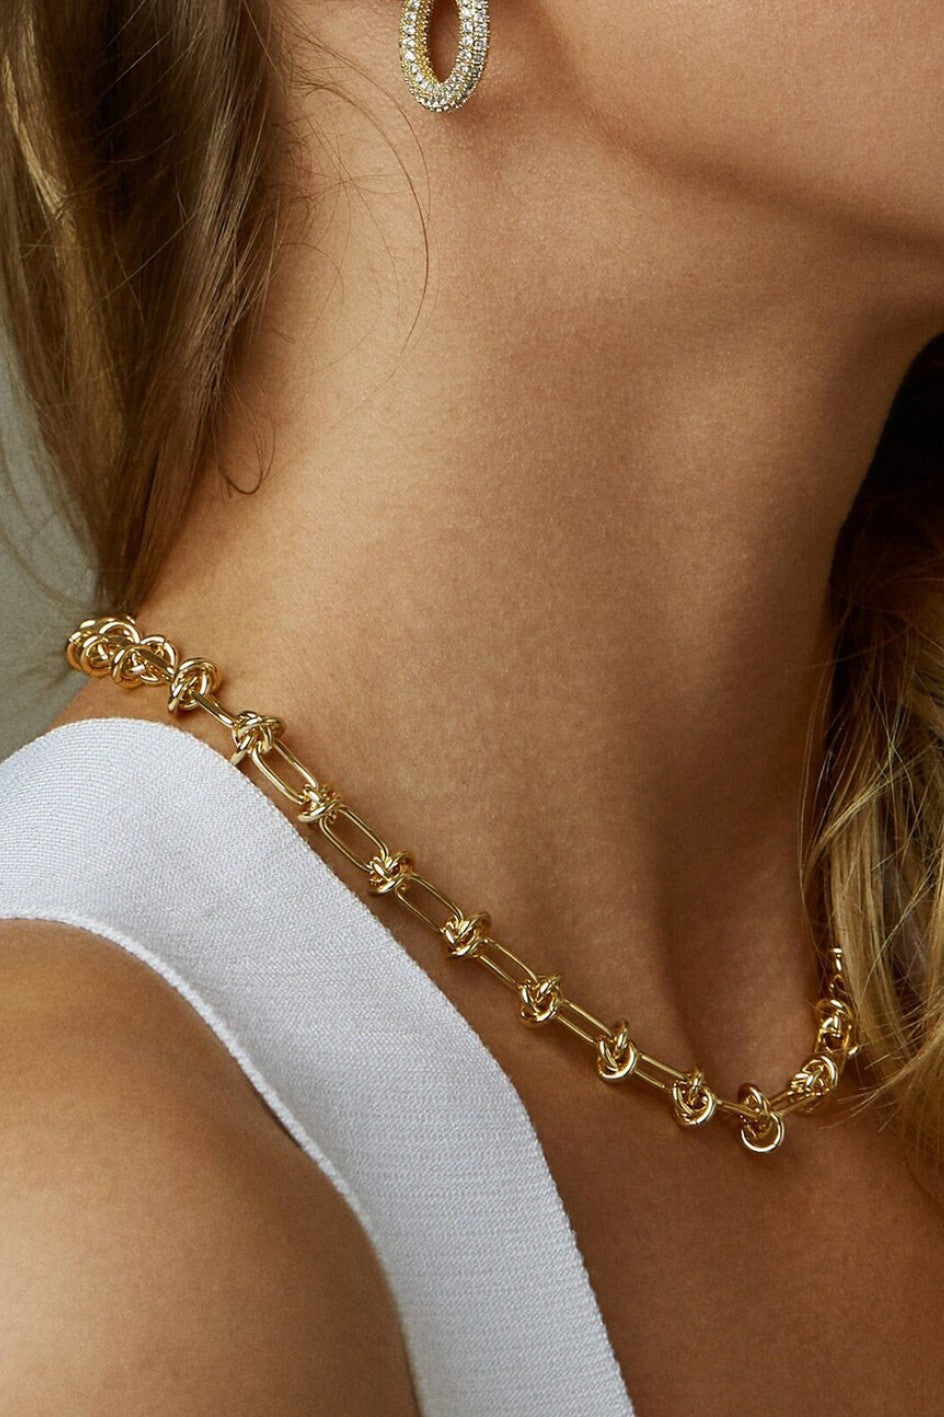 Knot Chain Necklace